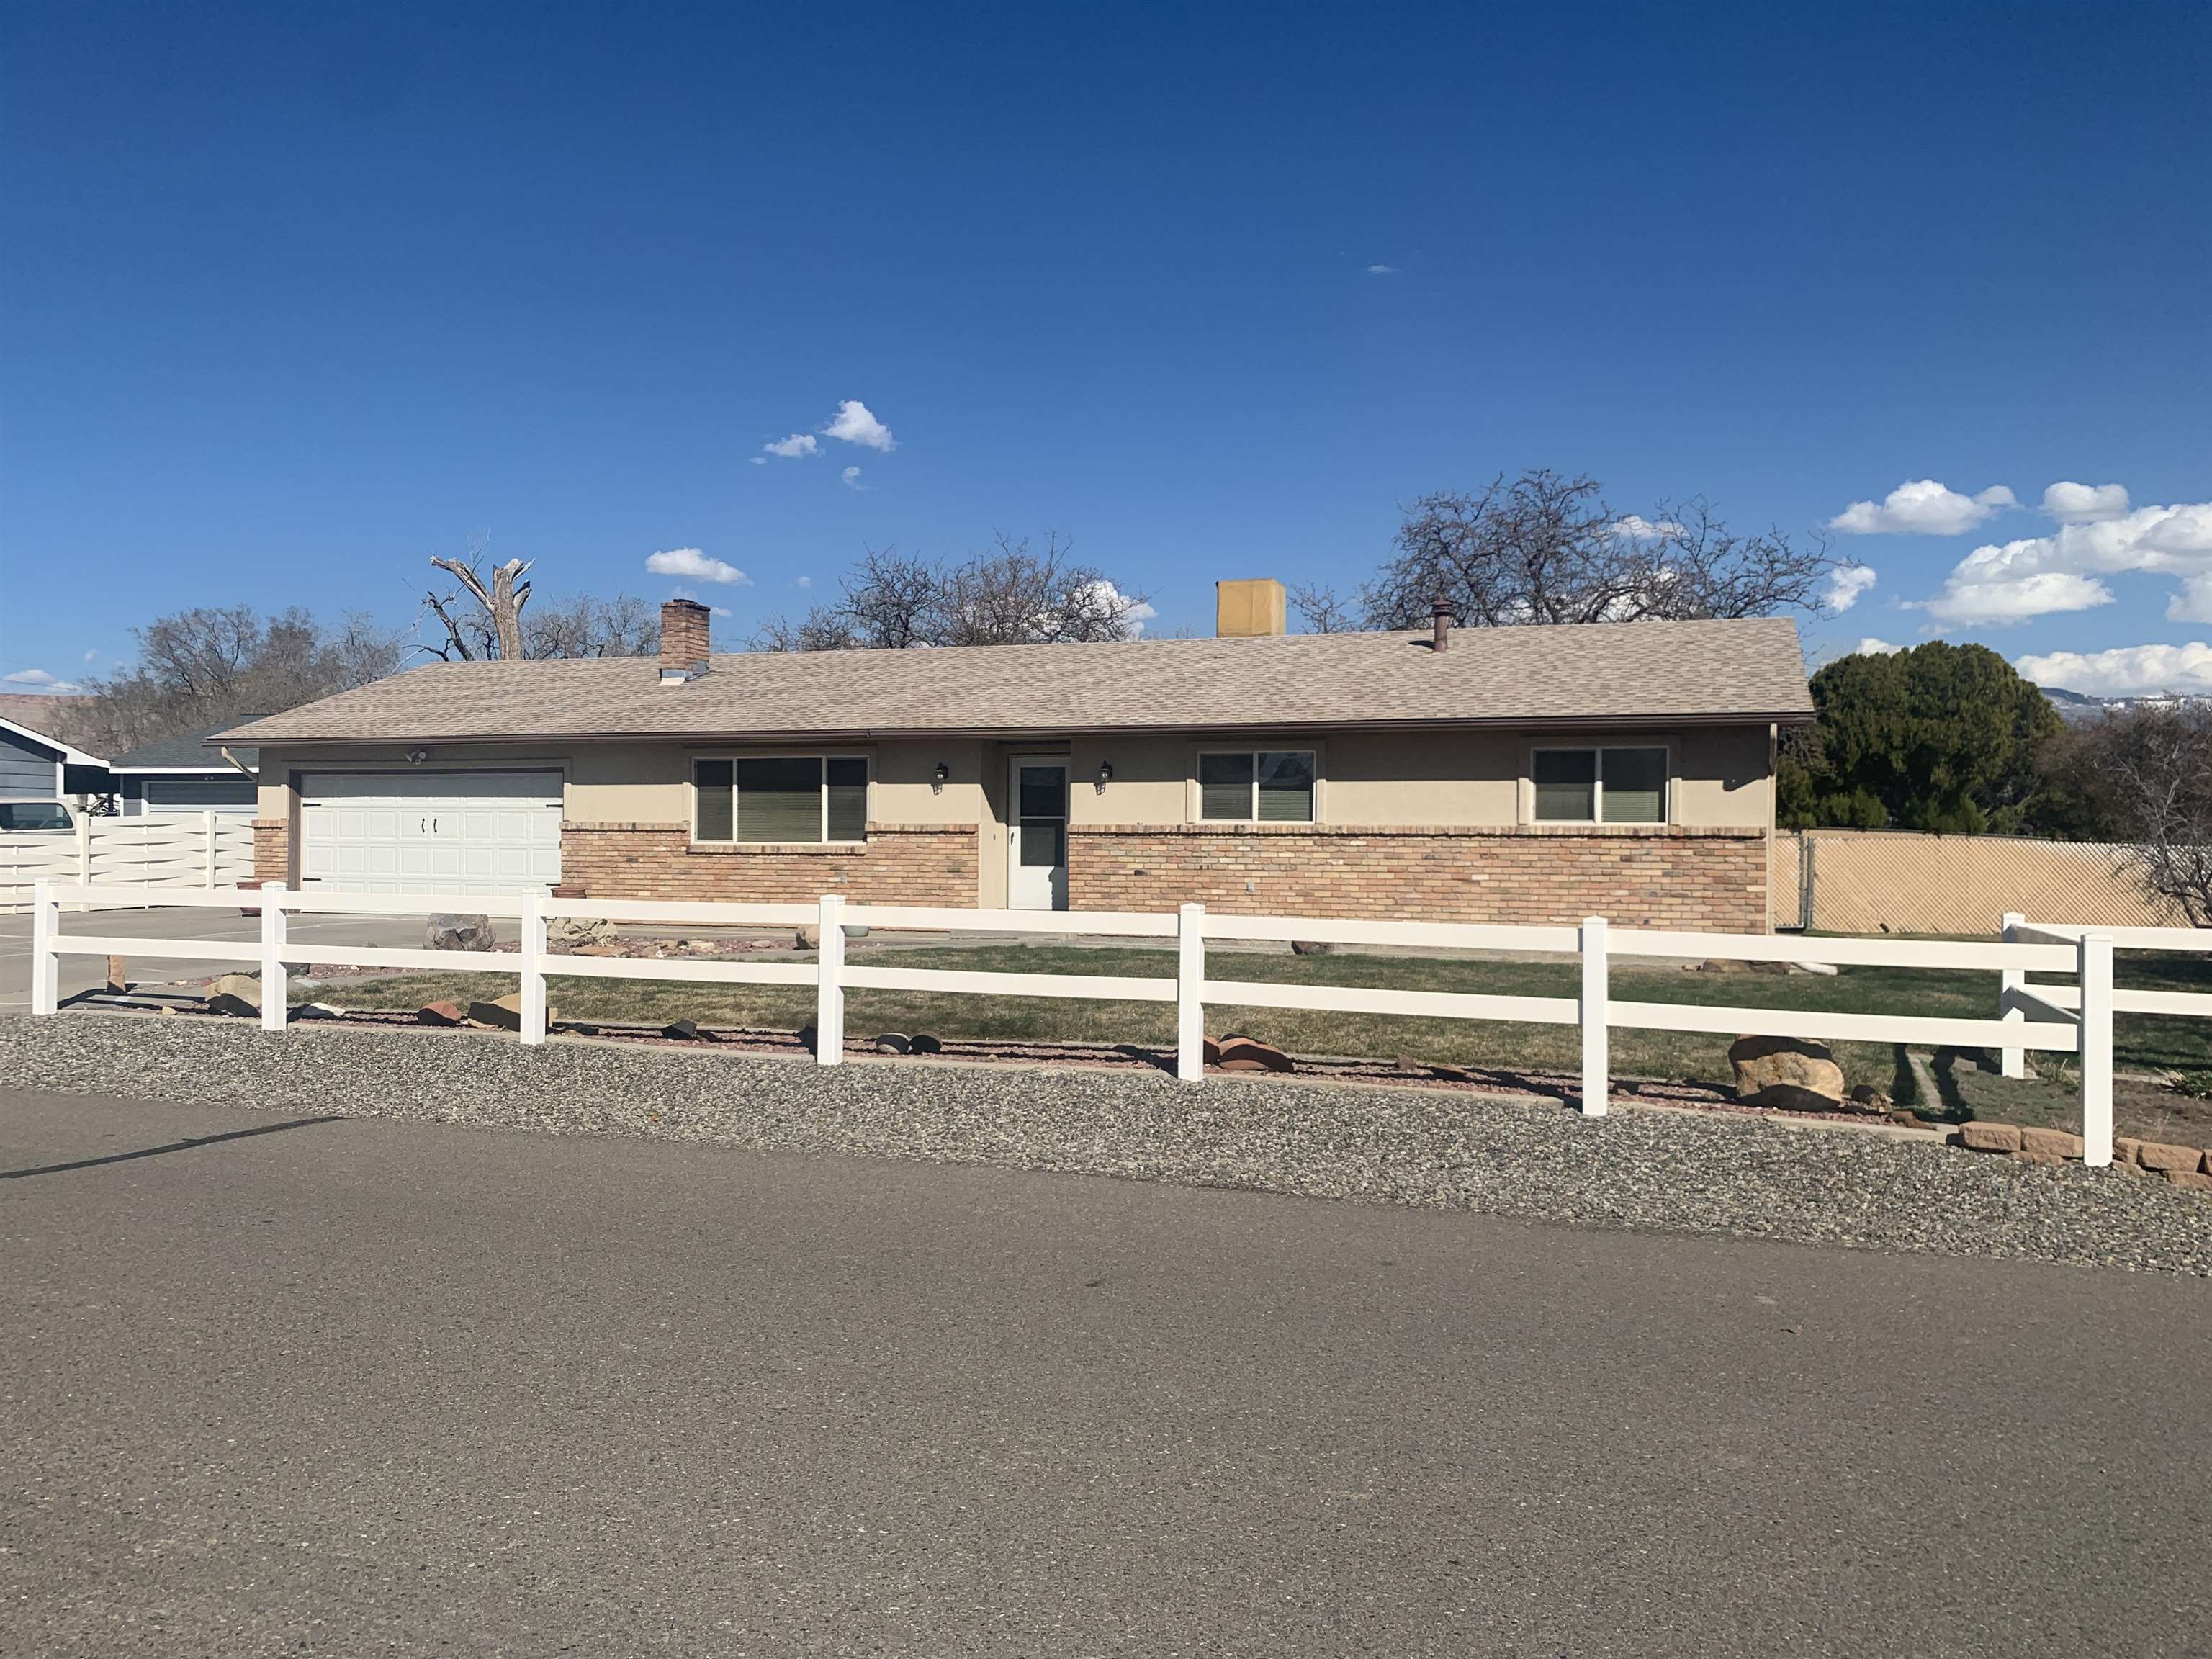 492 31 1/4 Road, Grand Junction, CO 